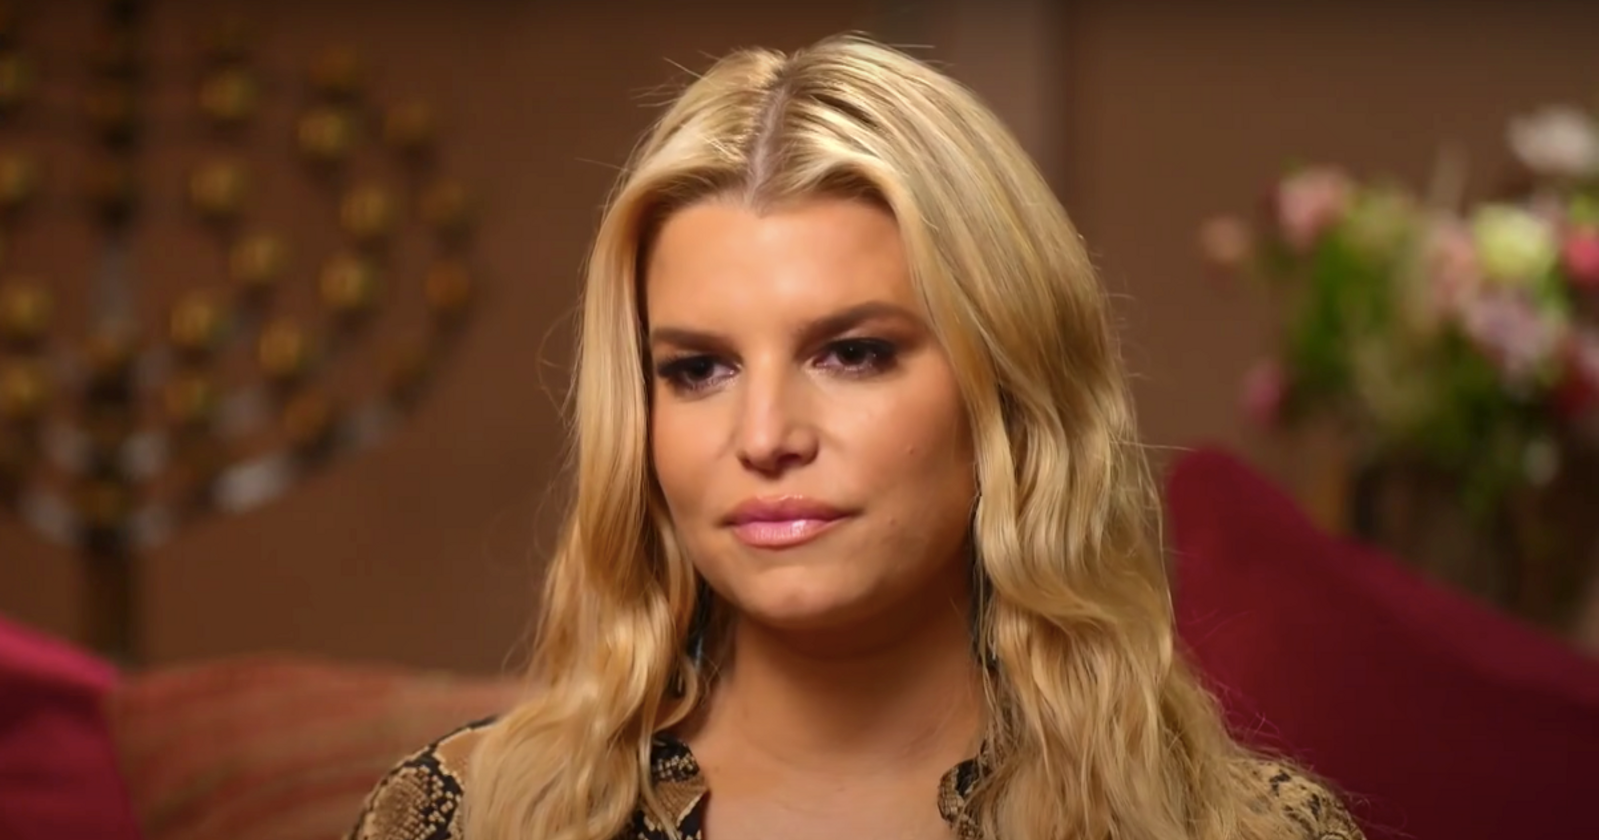 The Drinking Wasn't The Issue”: Jessica Simpson Shares “Unrecognizable”  Photo Of Herself